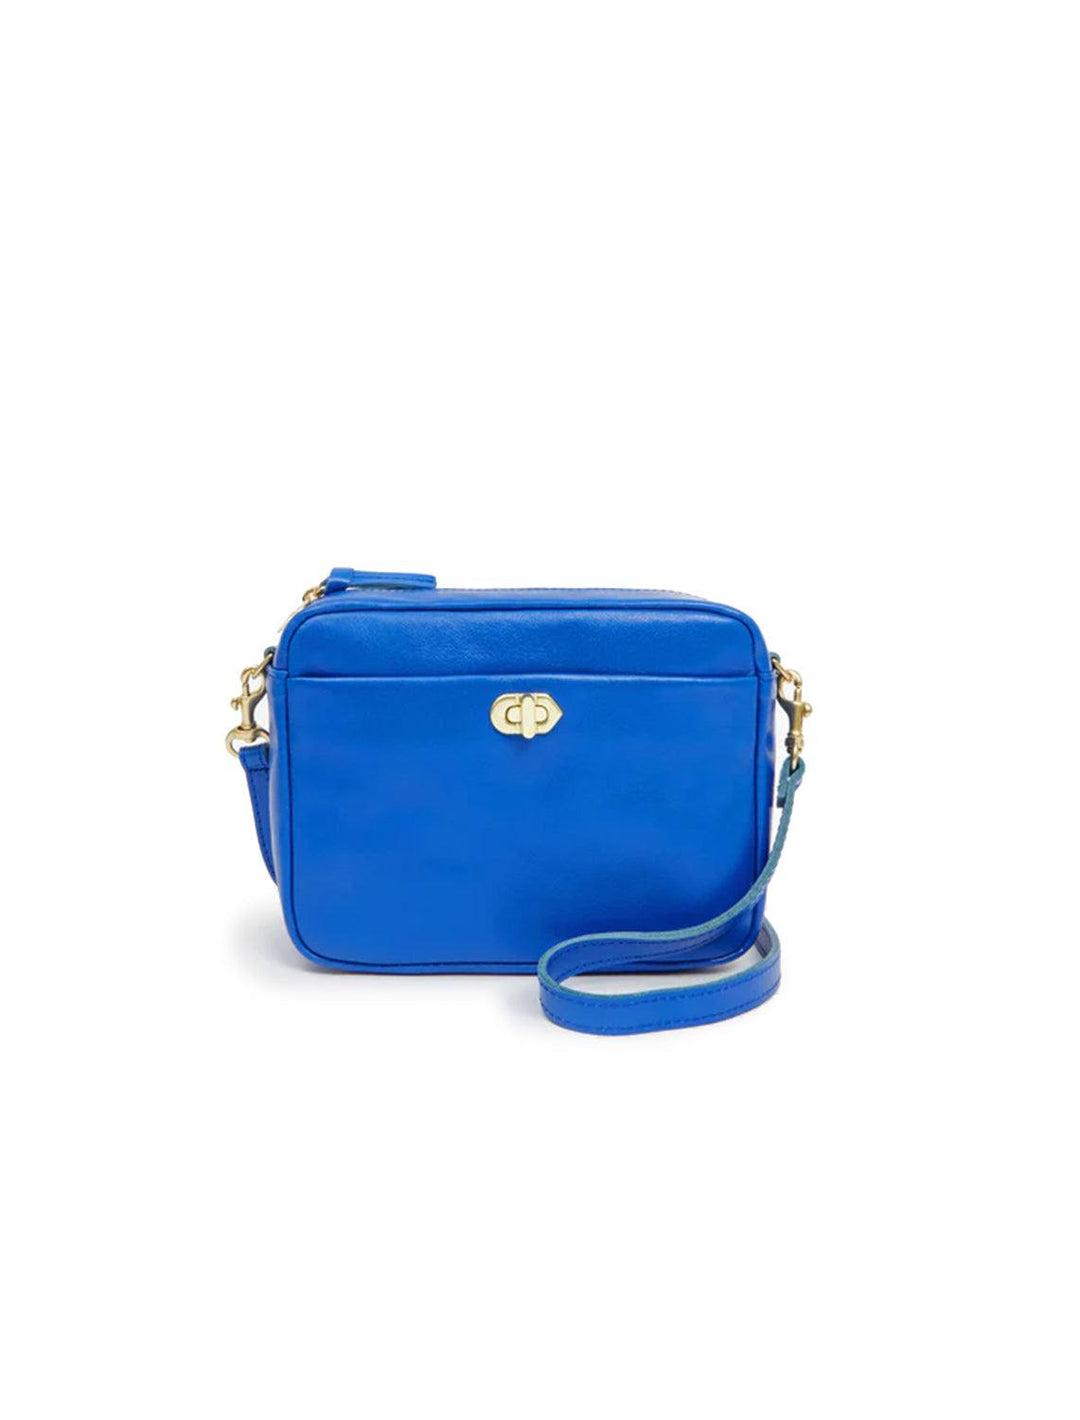 Clare V. Foldover Clutch with Tabs - Suede/Nappa Patchwork